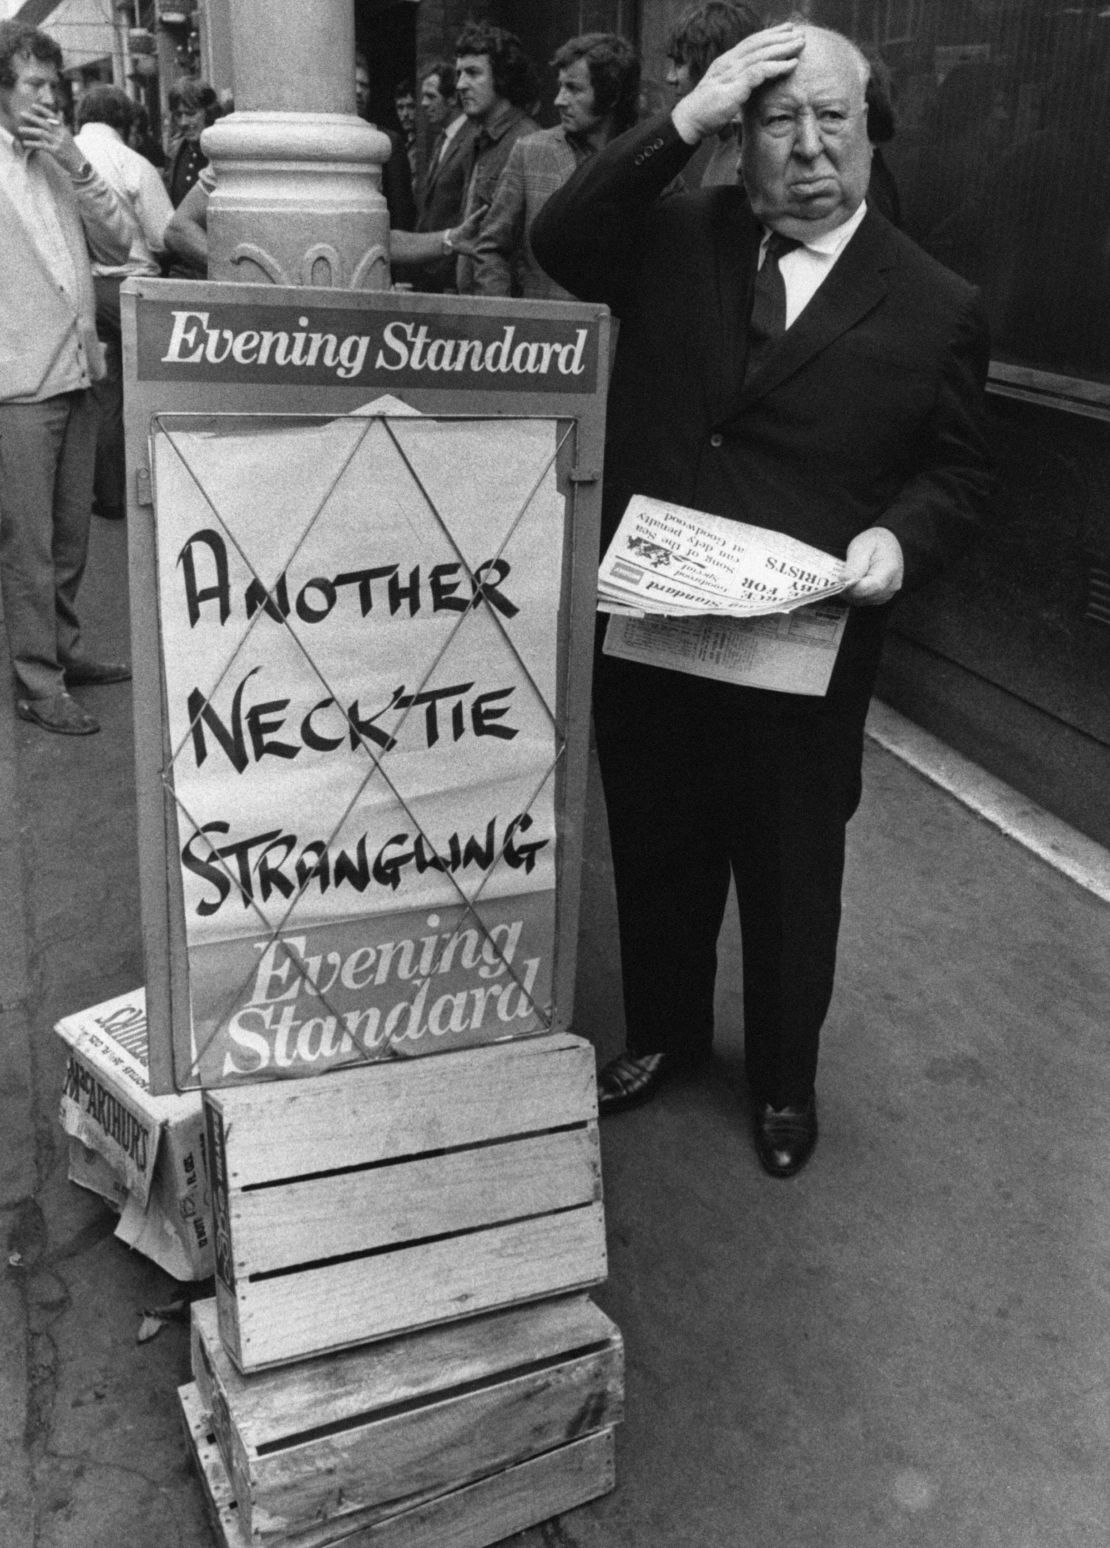 Alfred Hitchcock buys a copy of the Evening Standard with a chilling headline.